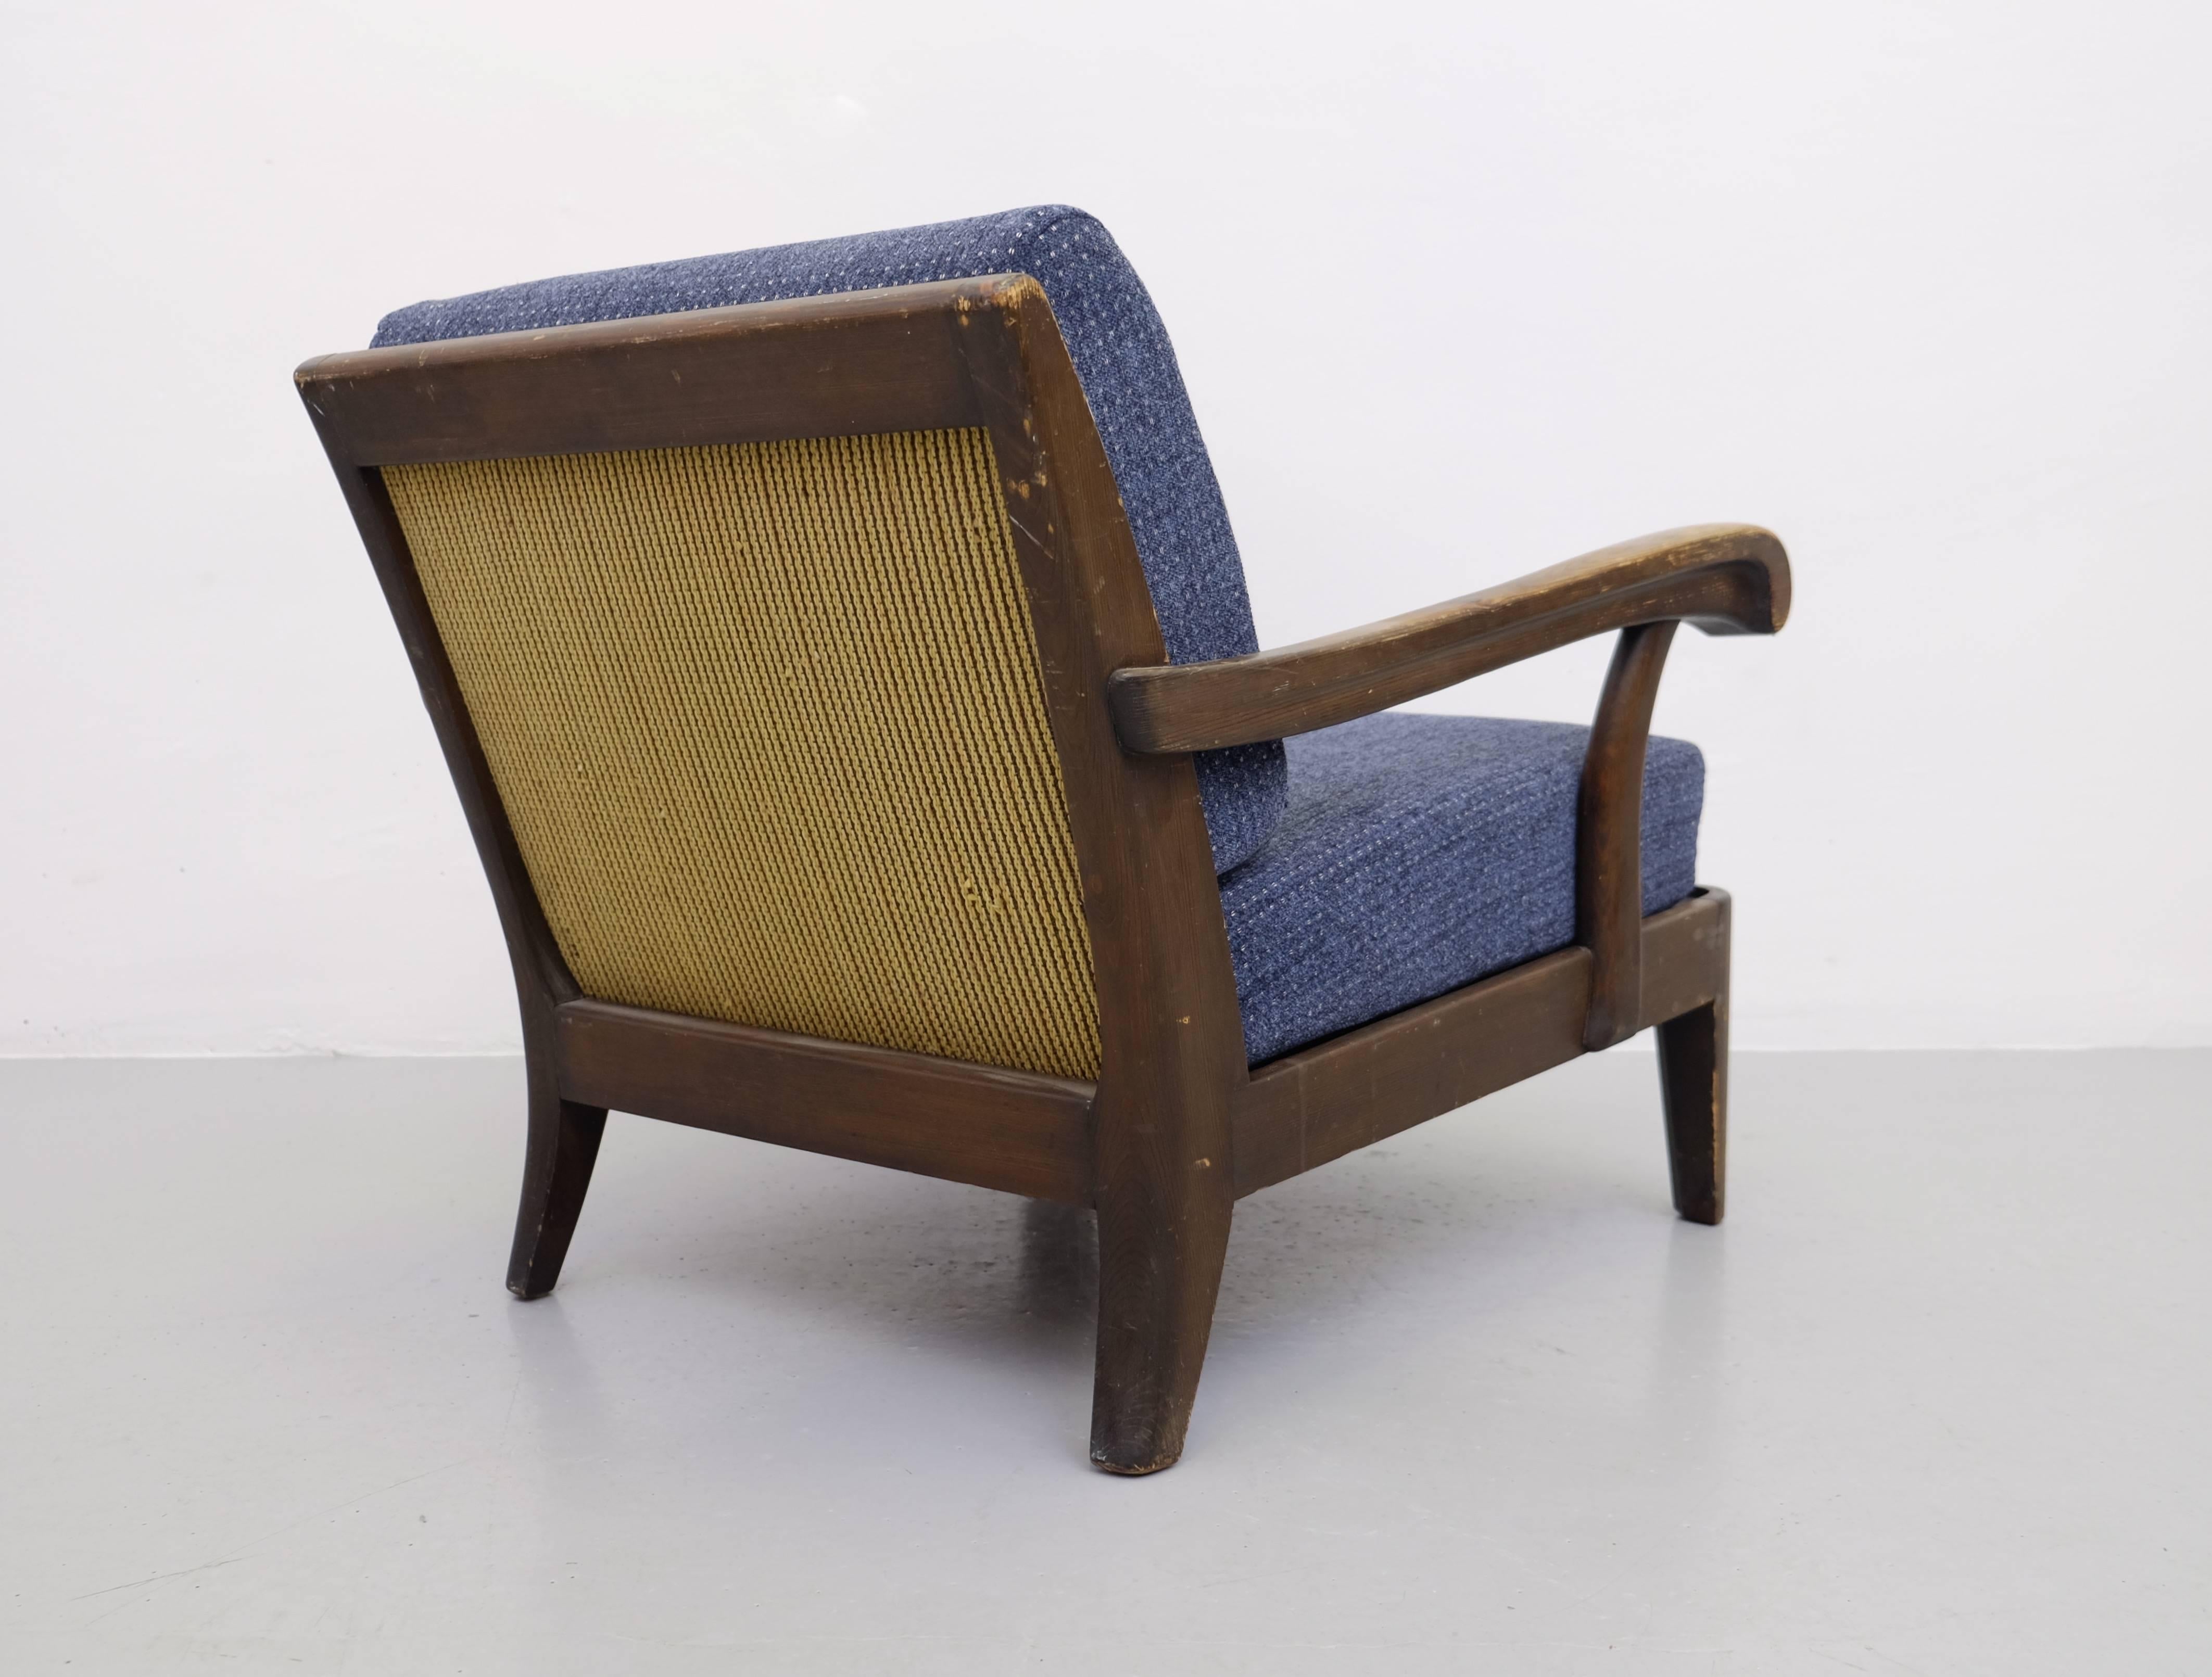 Provenance: 
Princess Sibylla, (1908-1972) mother to Sweden's present King, Carl XVI Gustav. The armchair were part of the interior at her summerhouse on Ingarö in the Stockholm archipelago. 

Four chairs known to exist.

Designer/manufacturer so